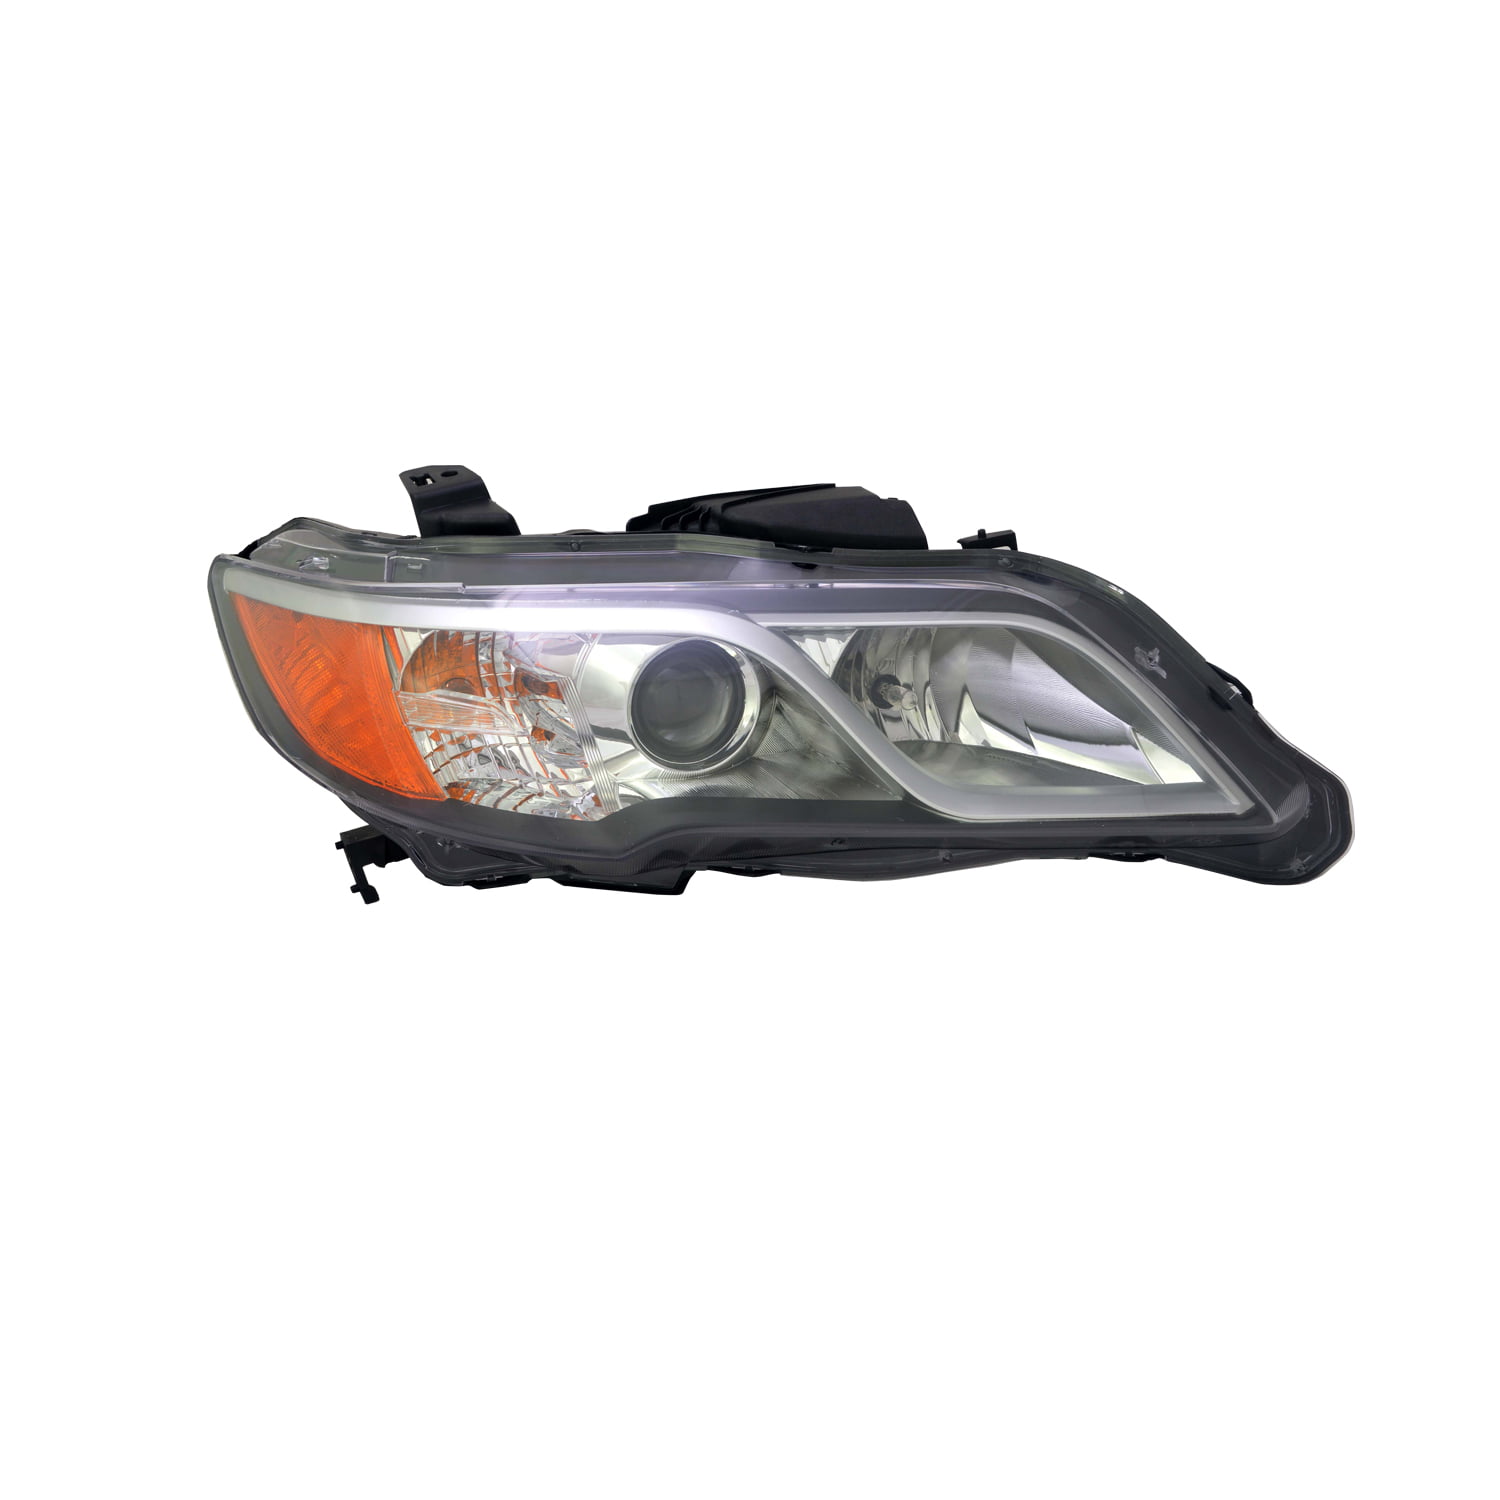 KAI New OEM Replacement Passenger Side Headlight Lens And Housing, Fits  2013-2015 Acura RDX